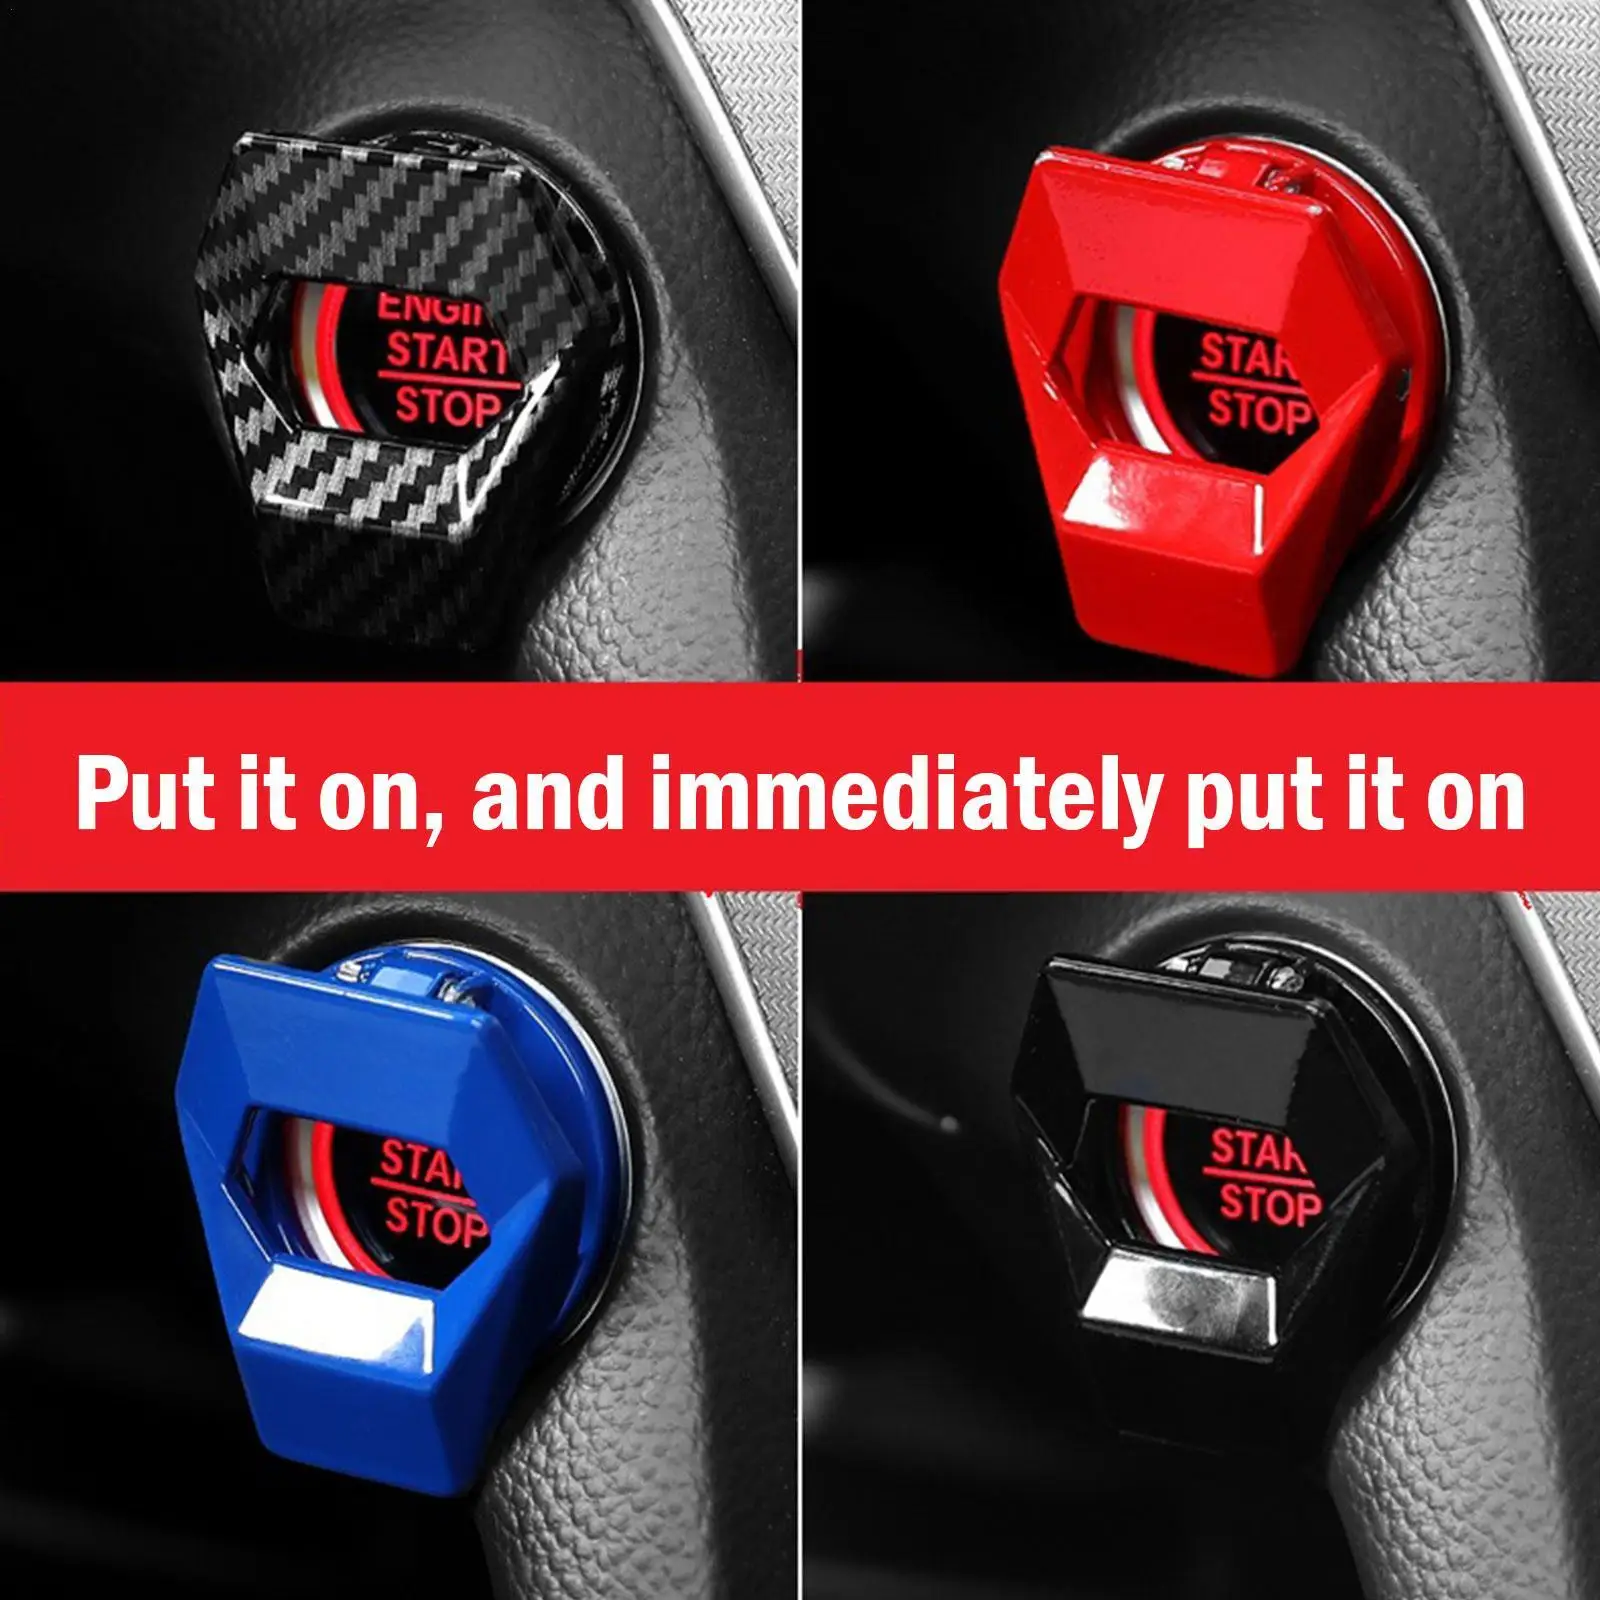 

Car Interior One-Key Start Ignition Engine Stop Push Switch Button Protective Cover Sticky Cover Car Interior Decoration